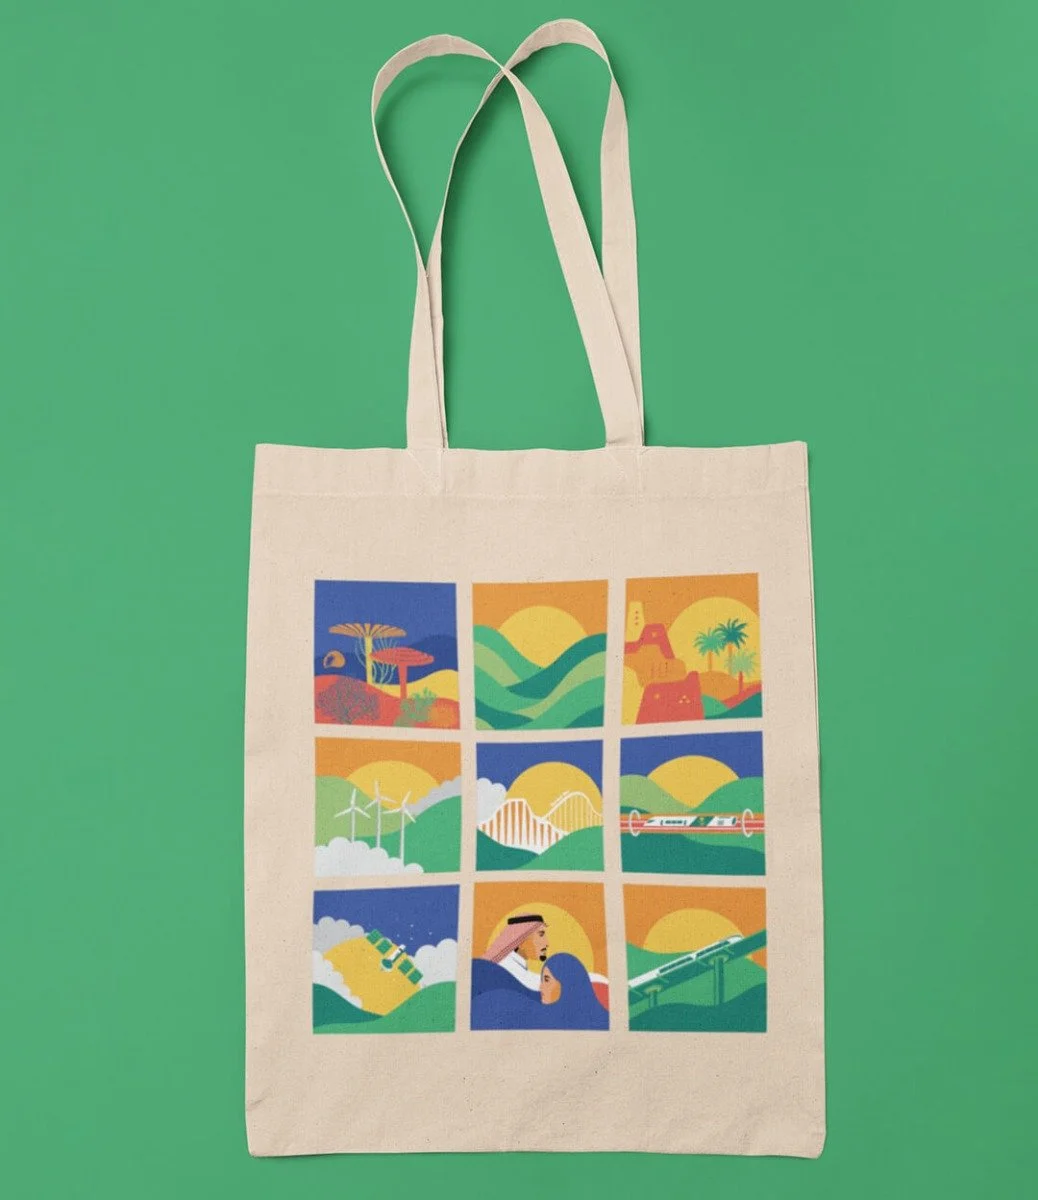 Tote Bag With the 92nd Saudi National Day Design